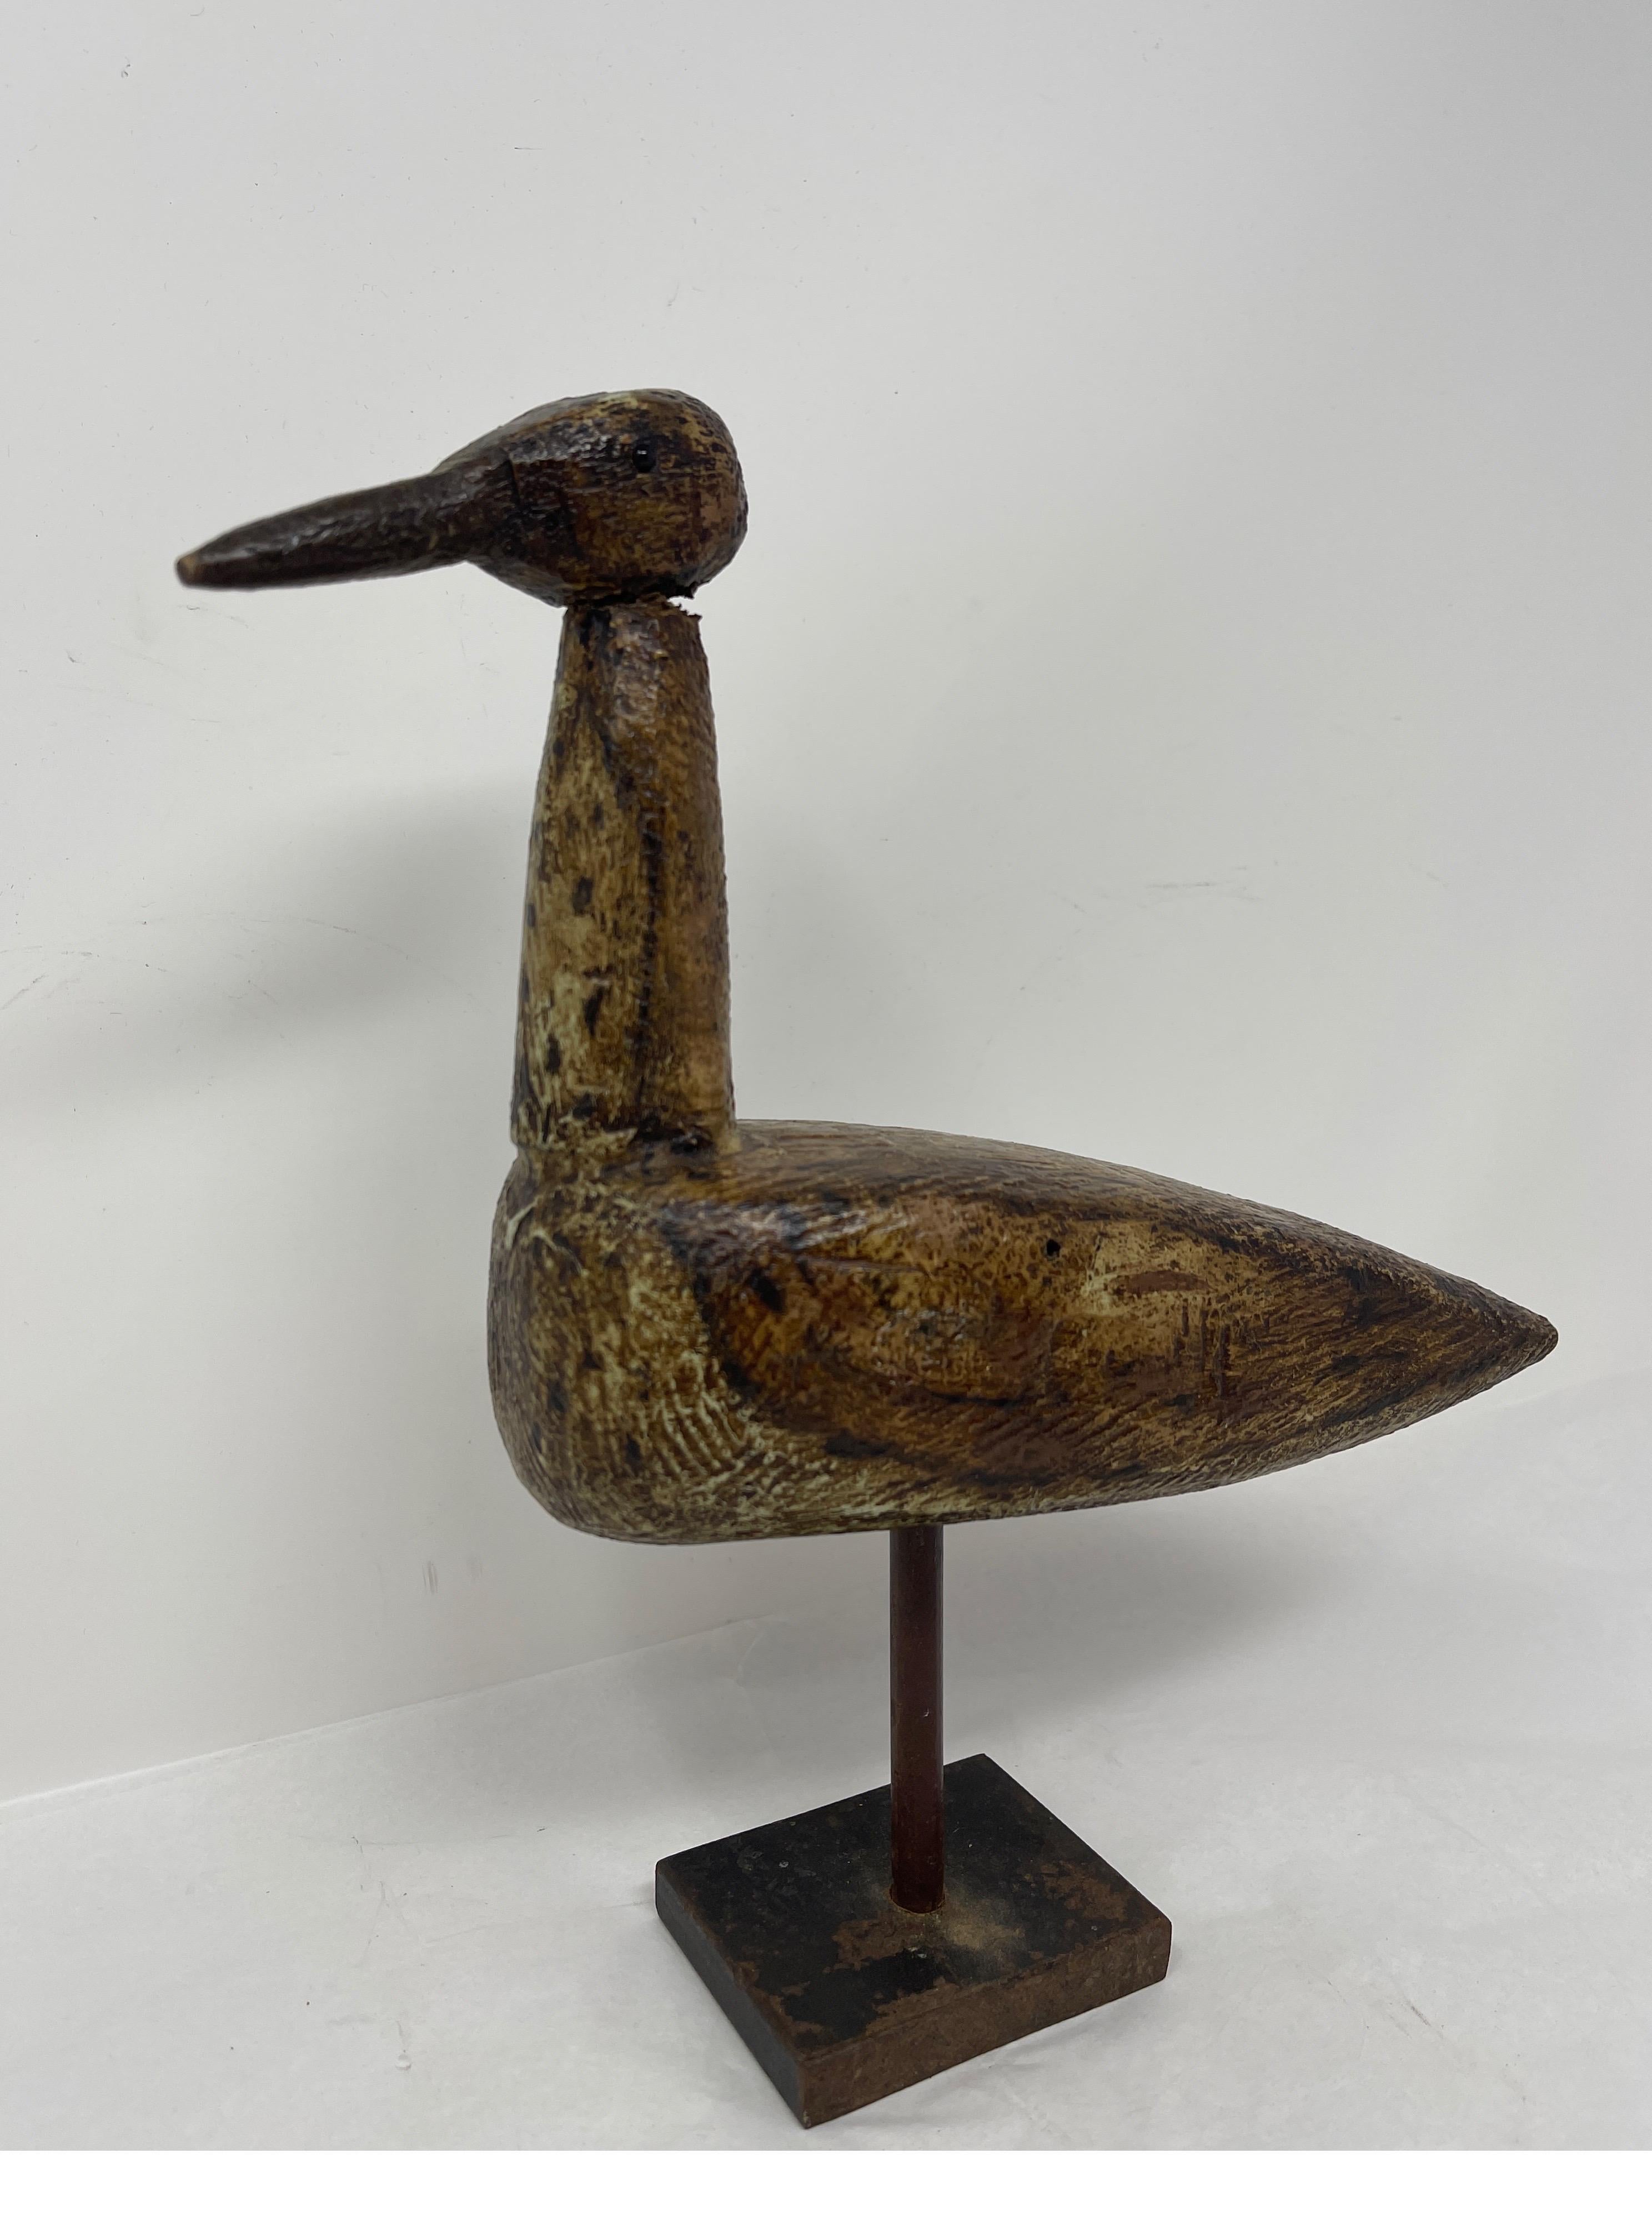 Made to look like a loon bobbing on a lake this vintage duck decoy on a custom stand would make a hunter's study complete. The decoy is carved 
 in wood and mounted on an iron stand. The stand is removable and the bird's head swivels.

Measures: